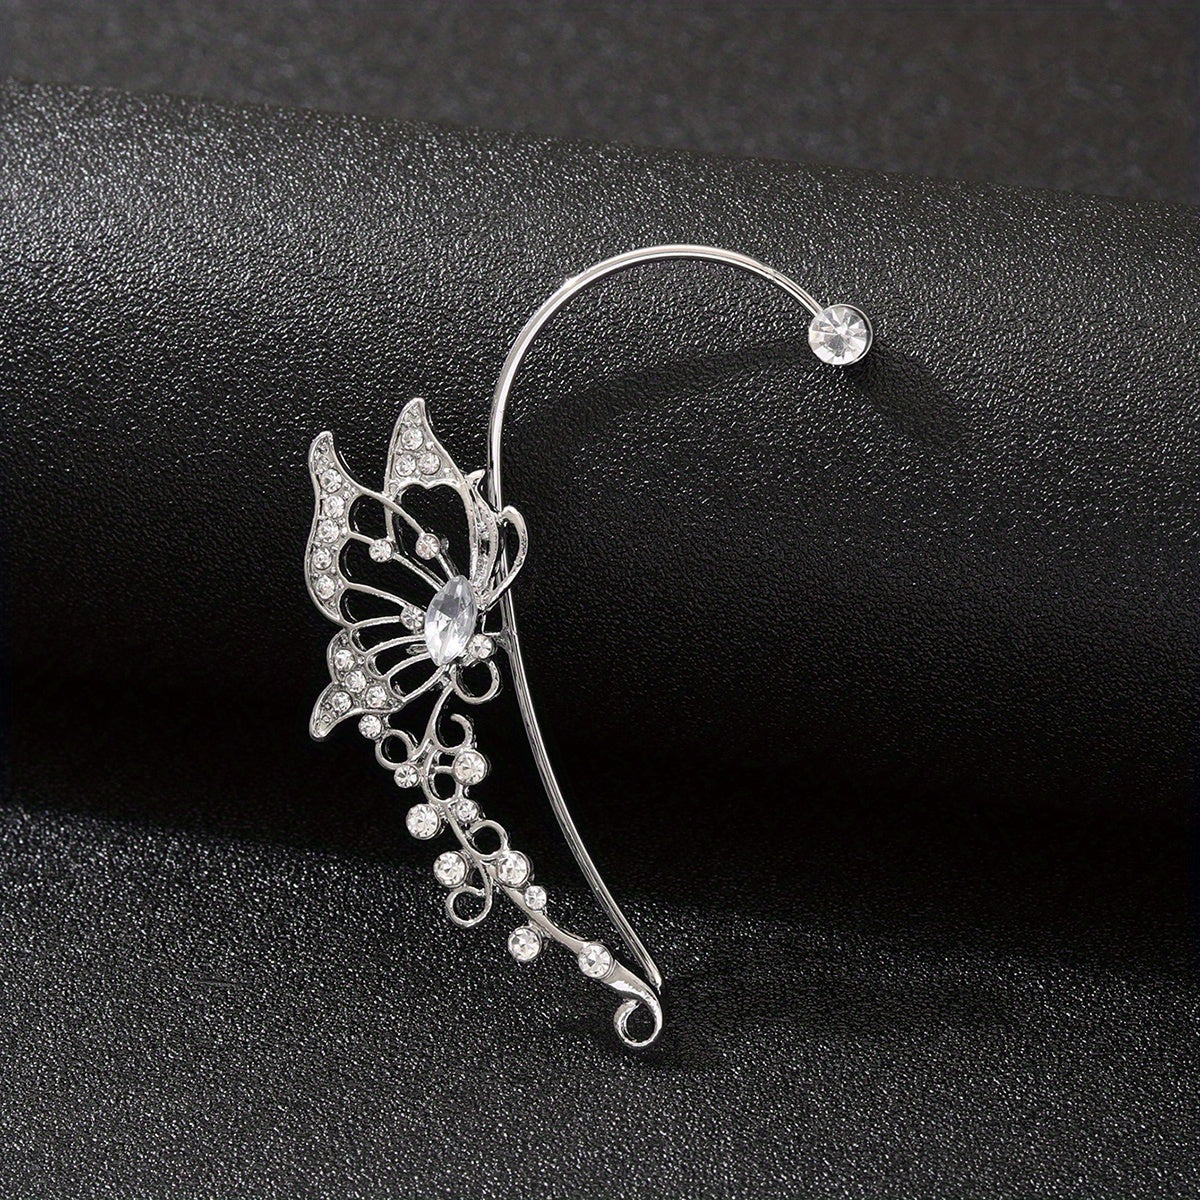 Upgrade Your Style with our Ladies Fashion Zicron Butterfly Earrings - No Piercing Required!